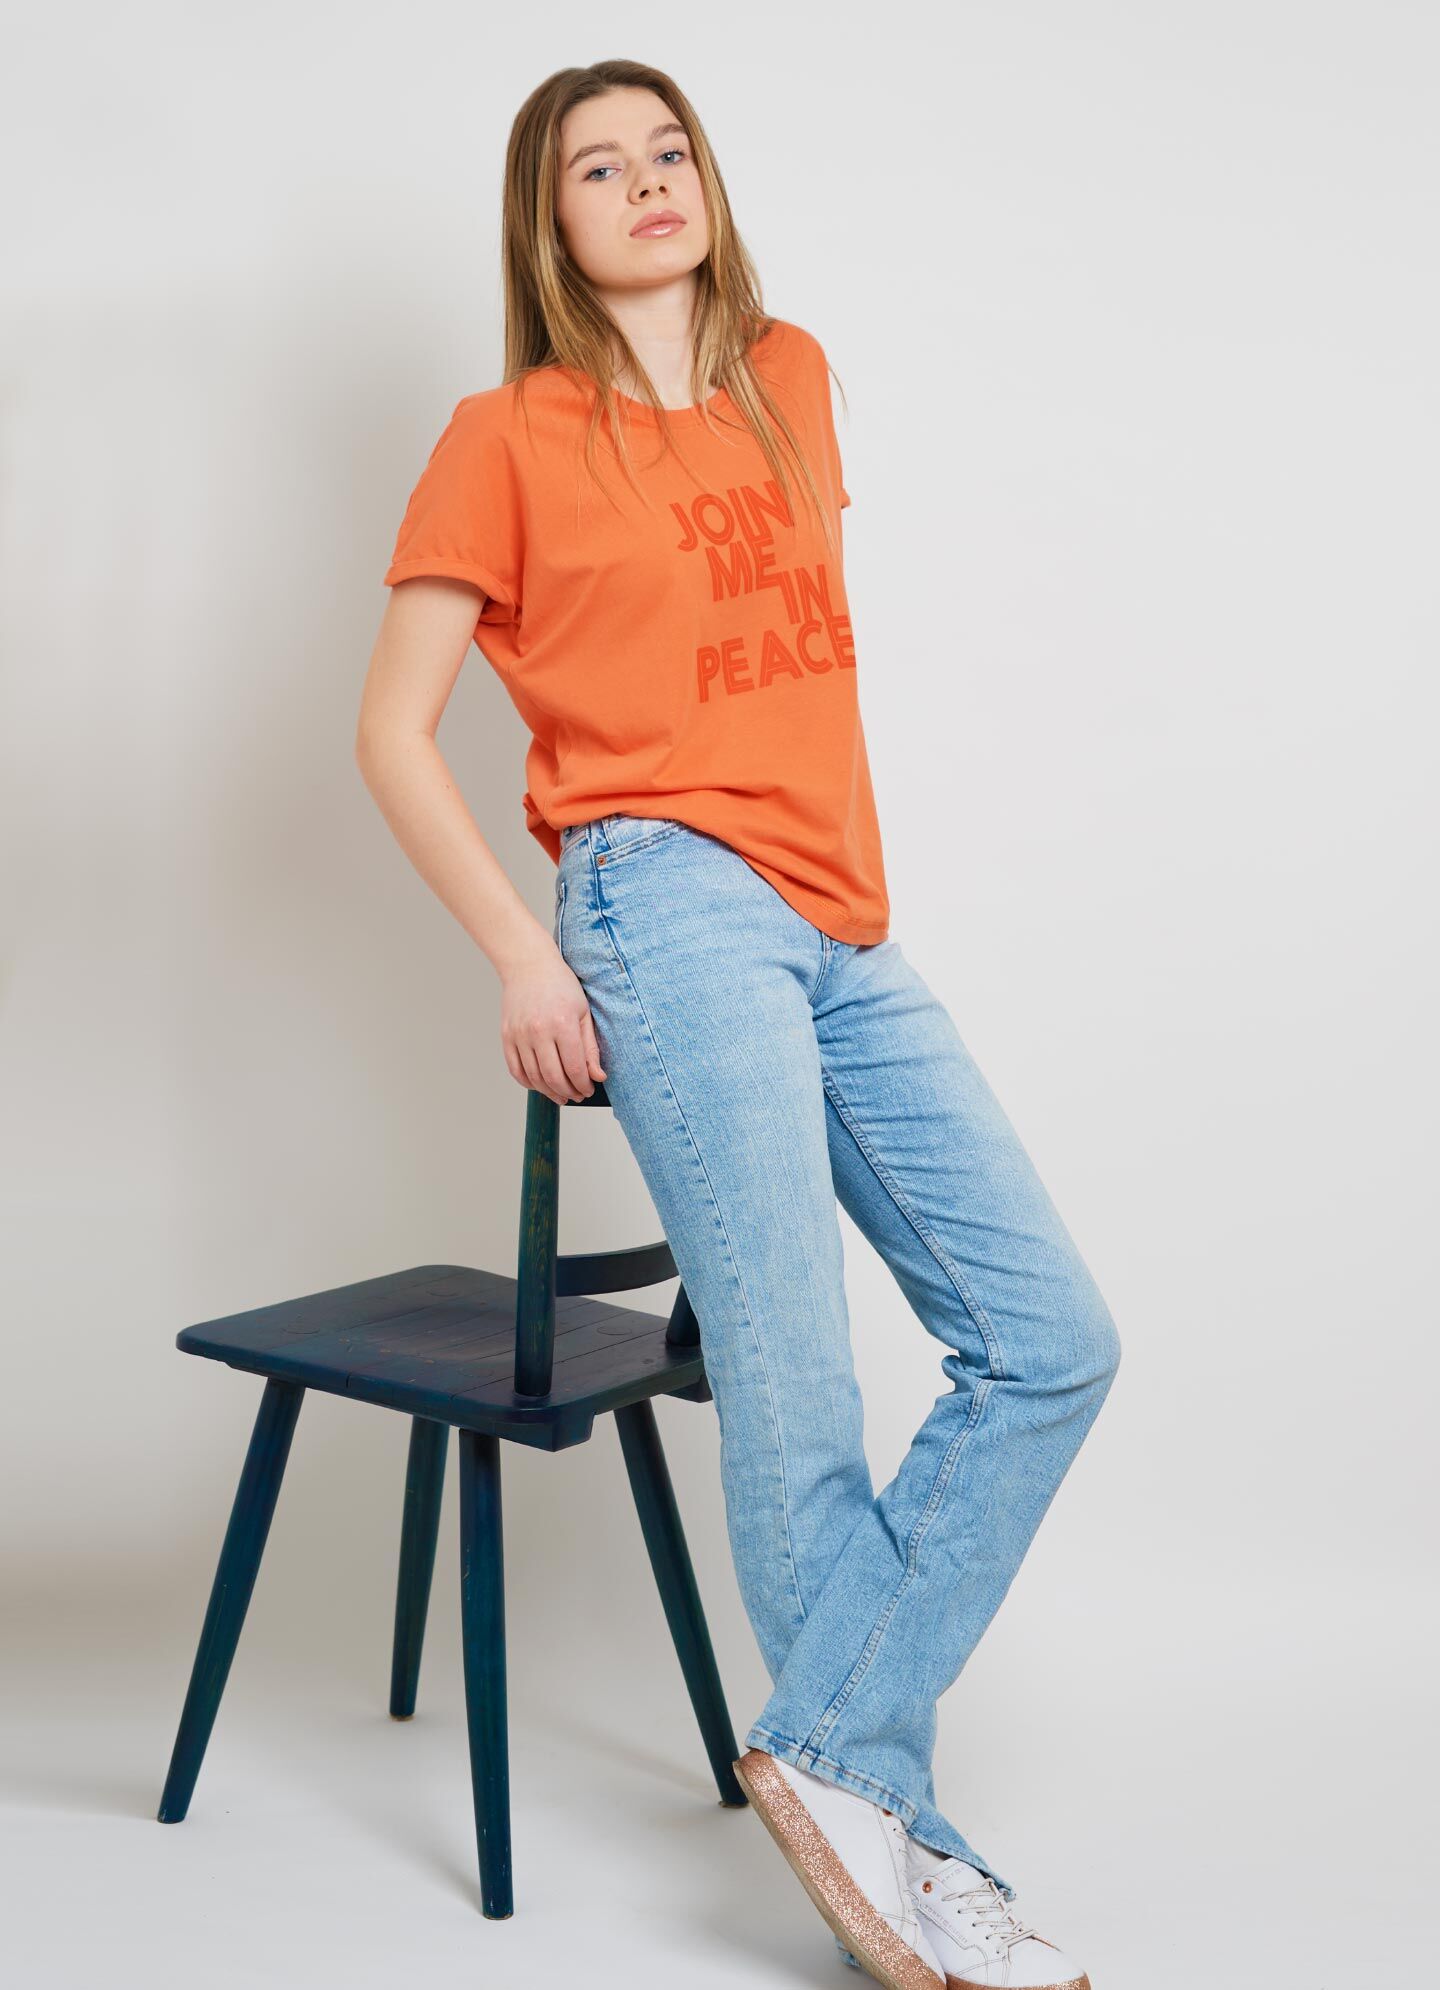 sparkles of light boxy t shirt 115 1 red orange all 00067 w